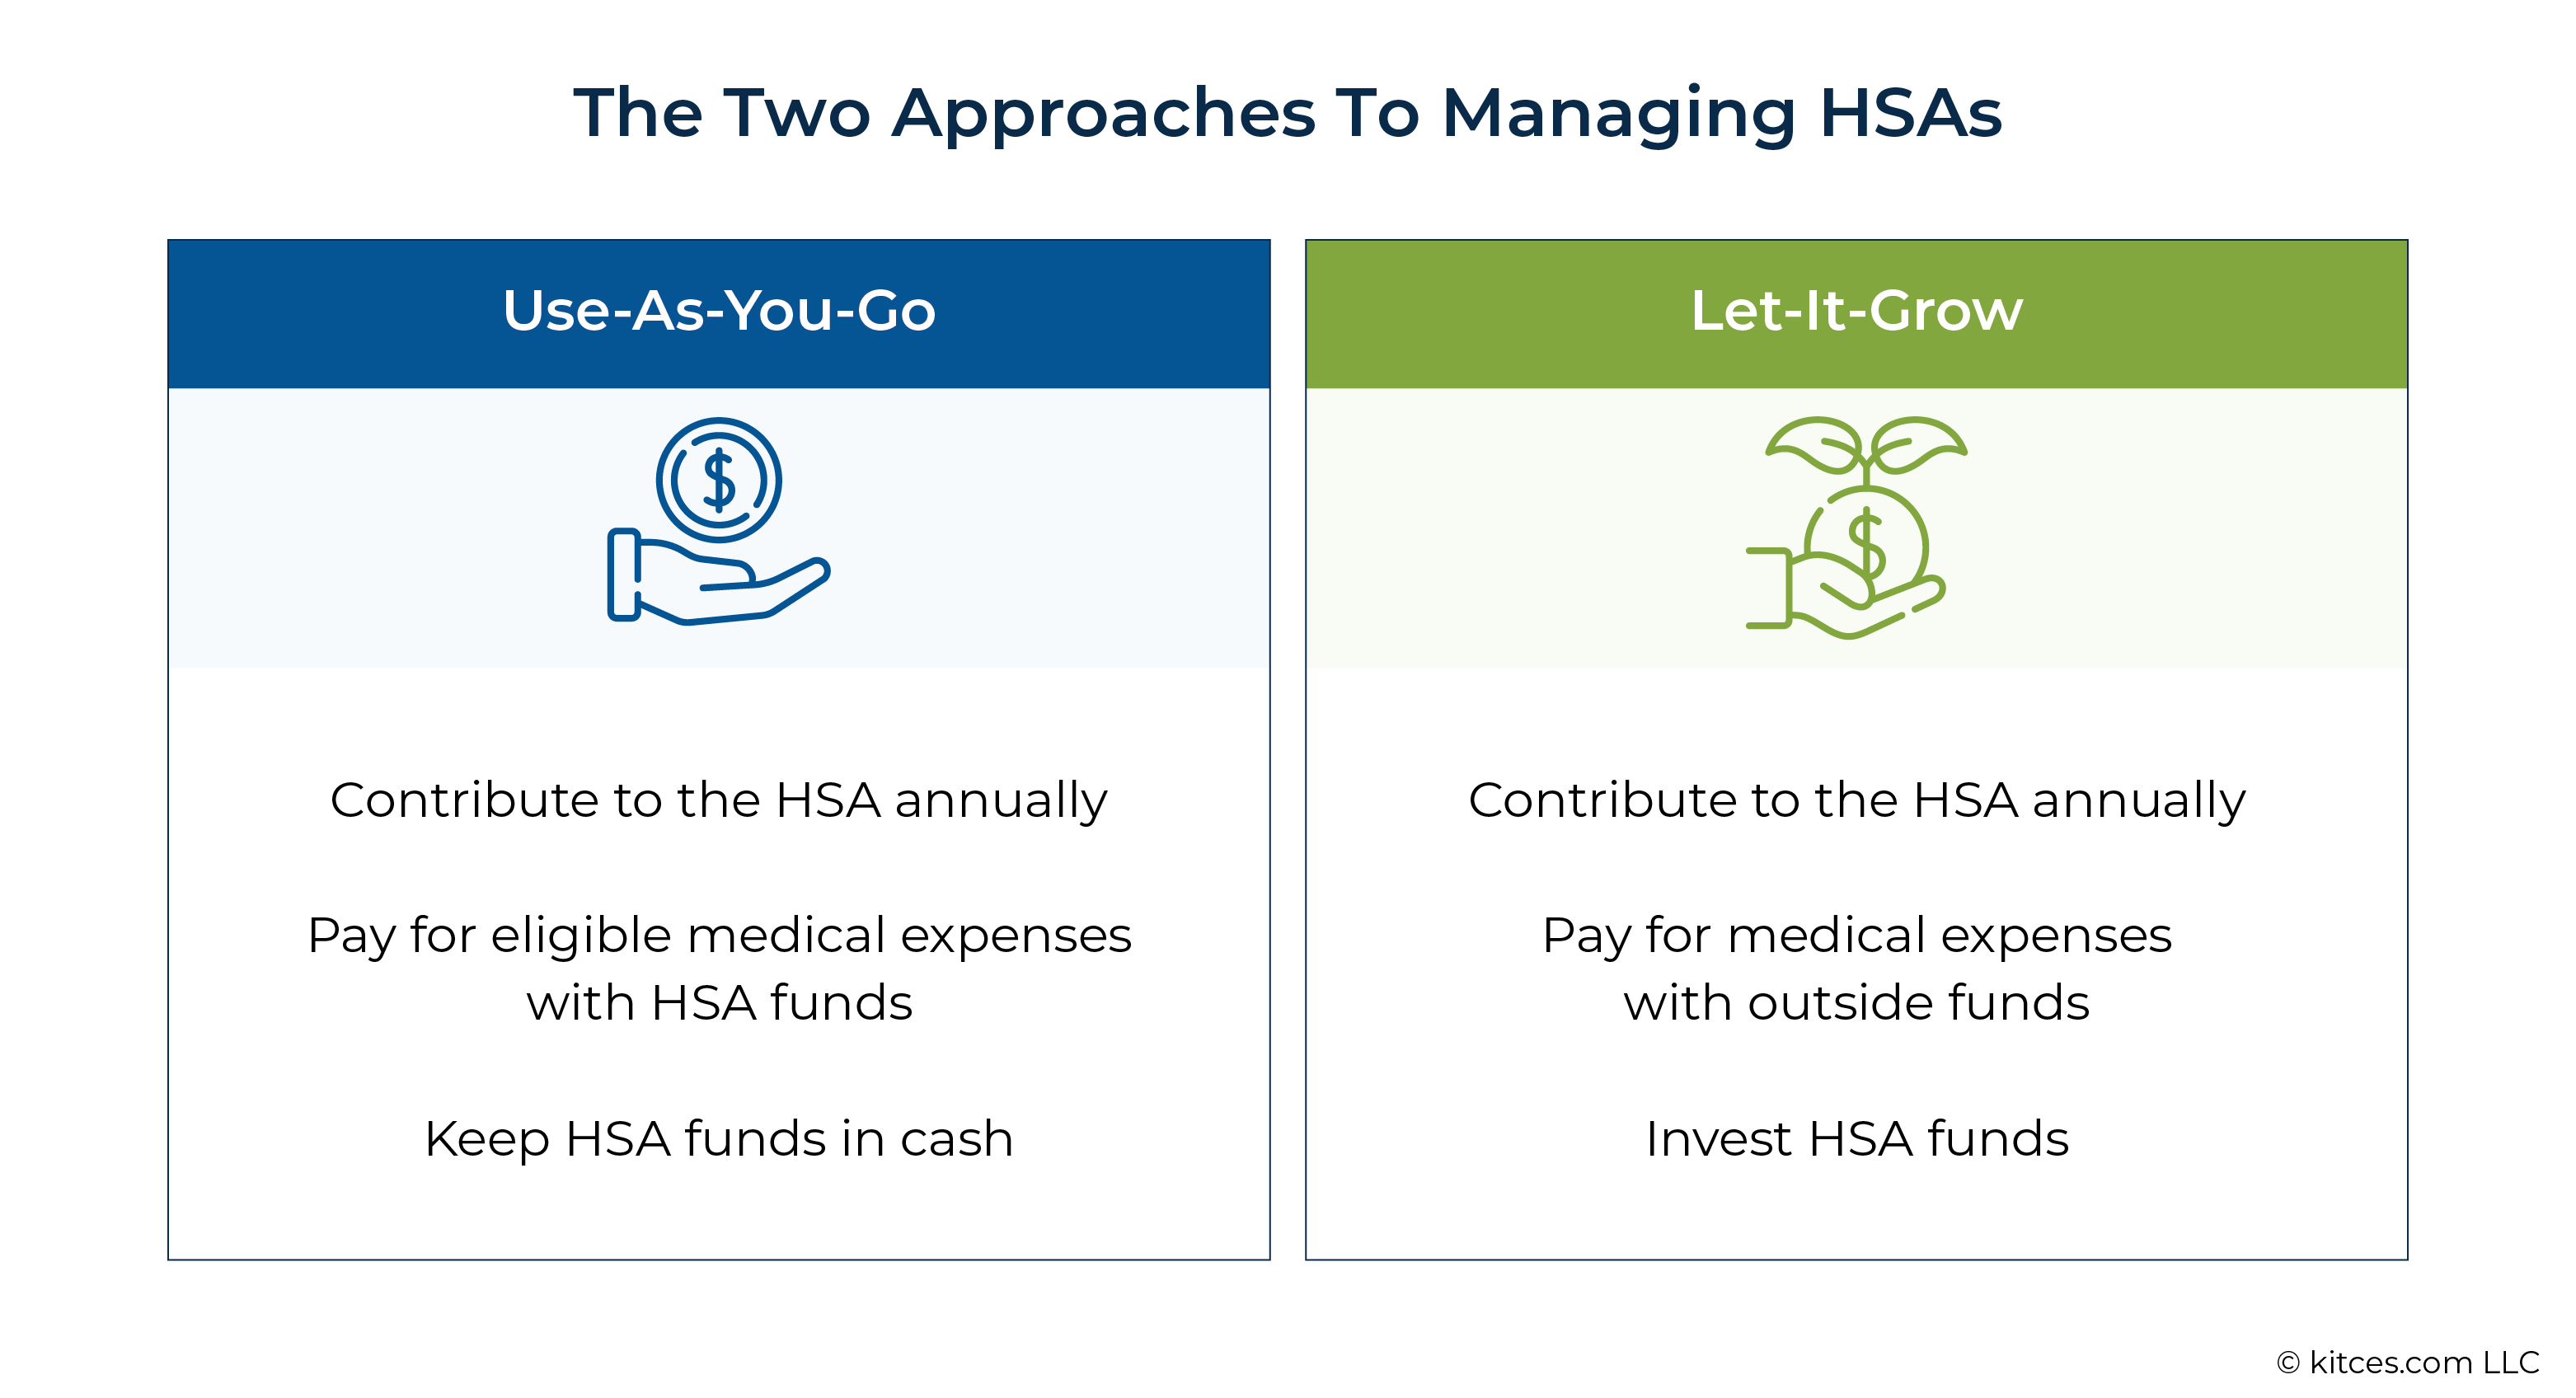 https://www.kitces.com/wp-content/uploads/2023/02/01-The-Two-Approaches-To-Managing-HSAs.png